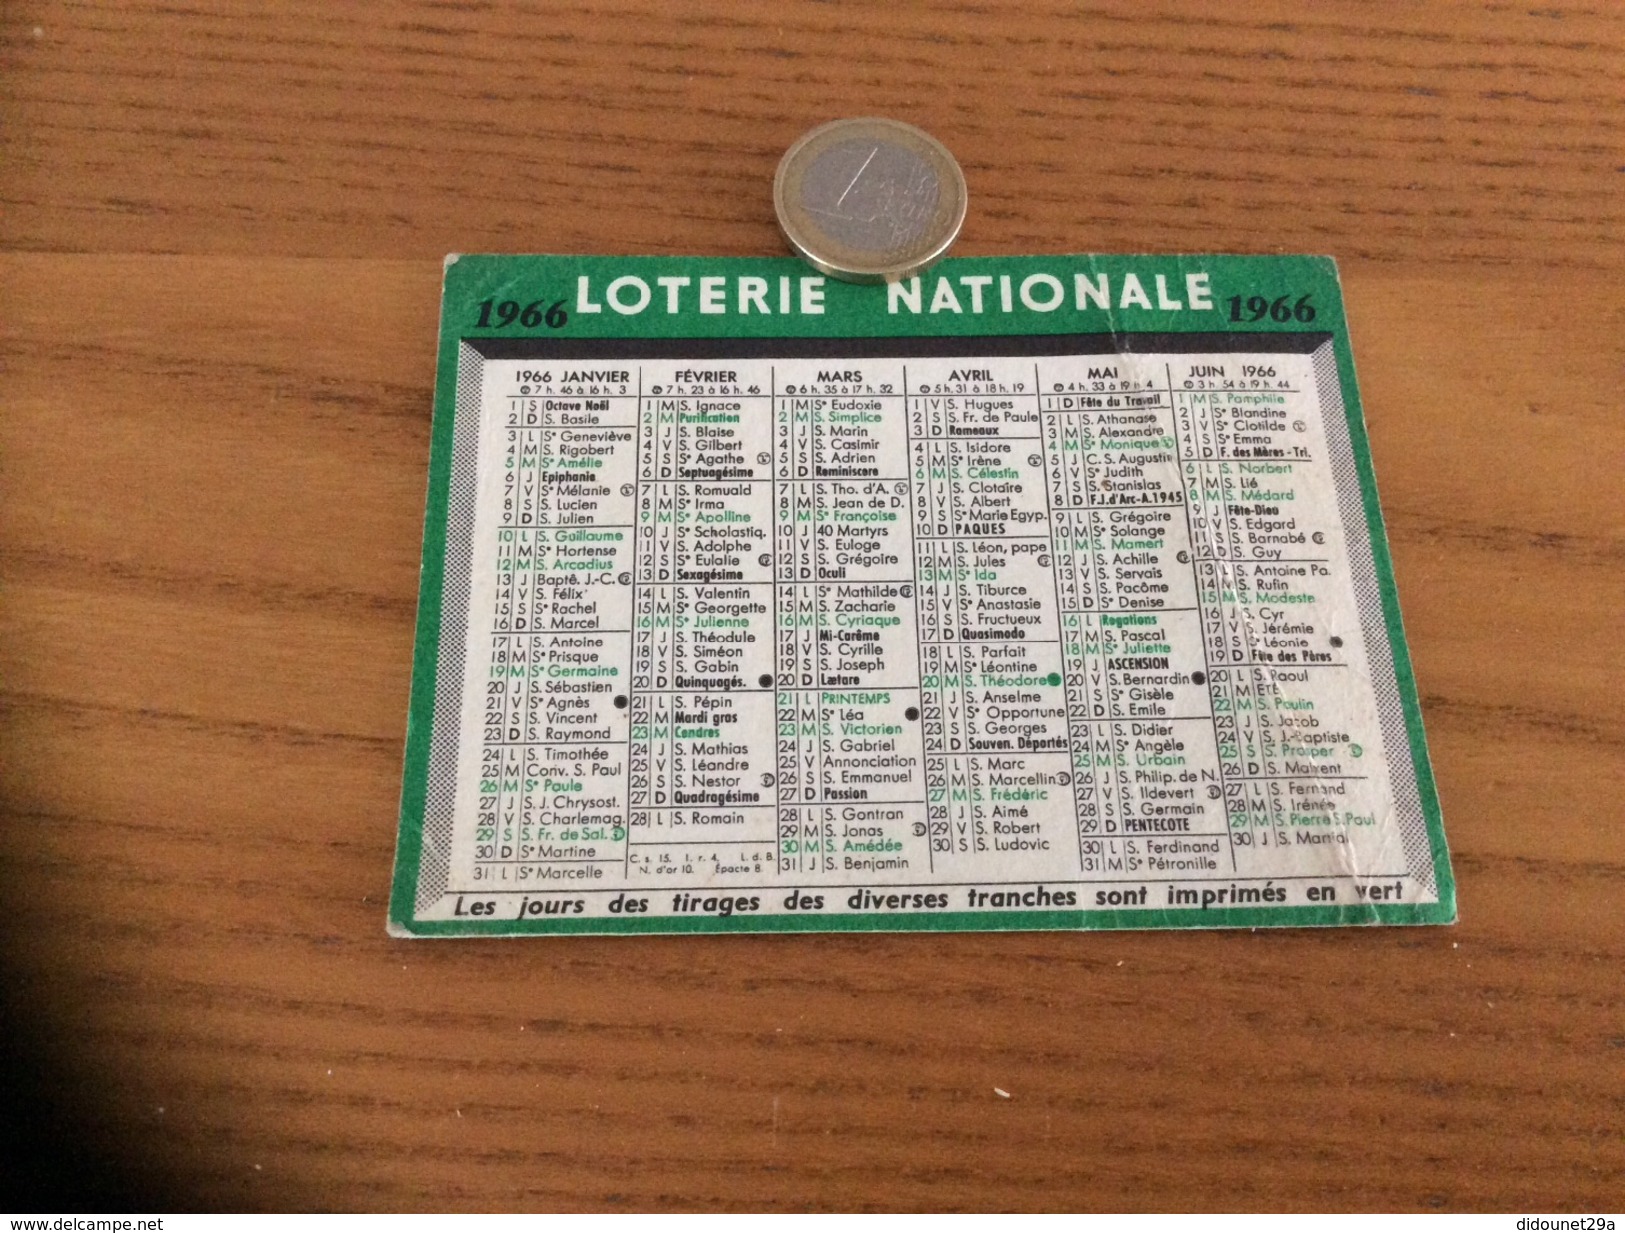 Calendrier 1966 « LOTERIE NATIONALE » - Small : 1961-70